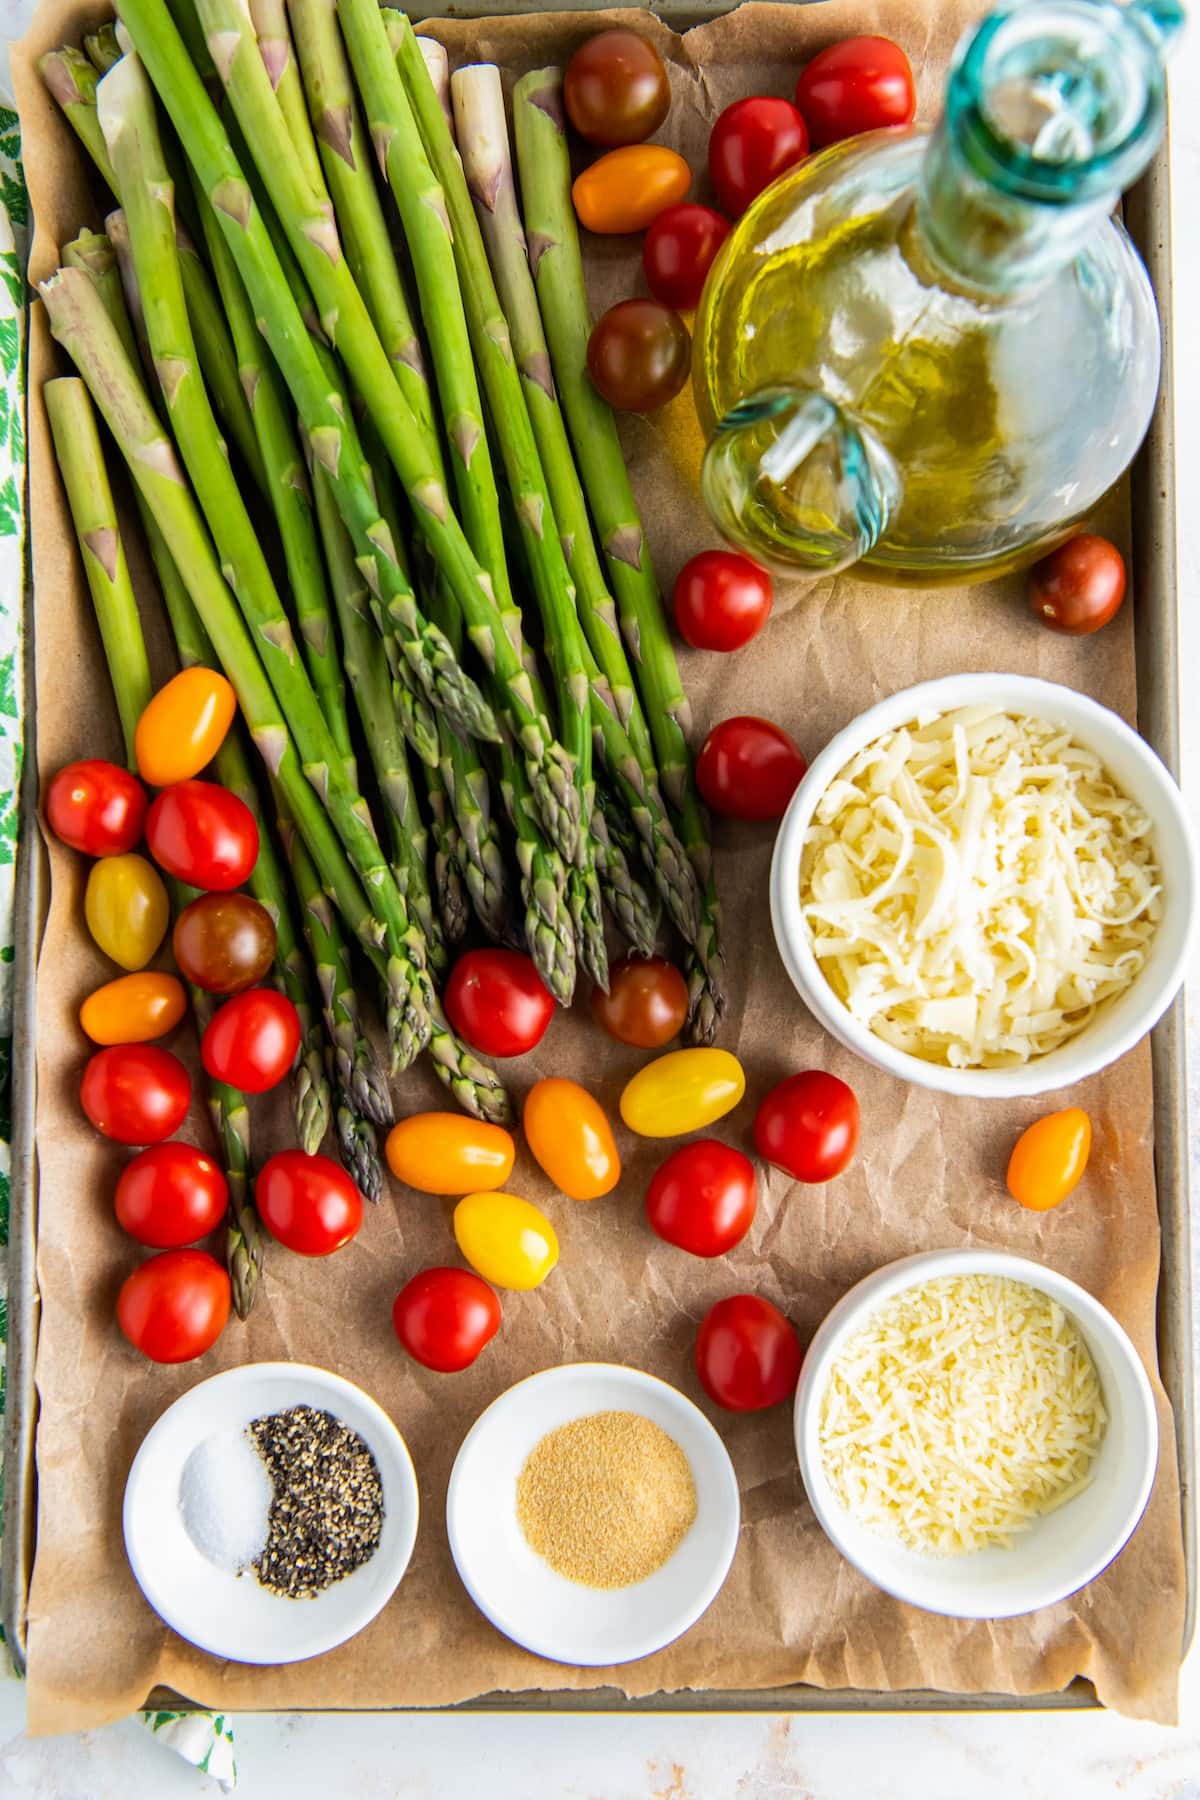 Ingredients for roasted asparagus and tomatoes.